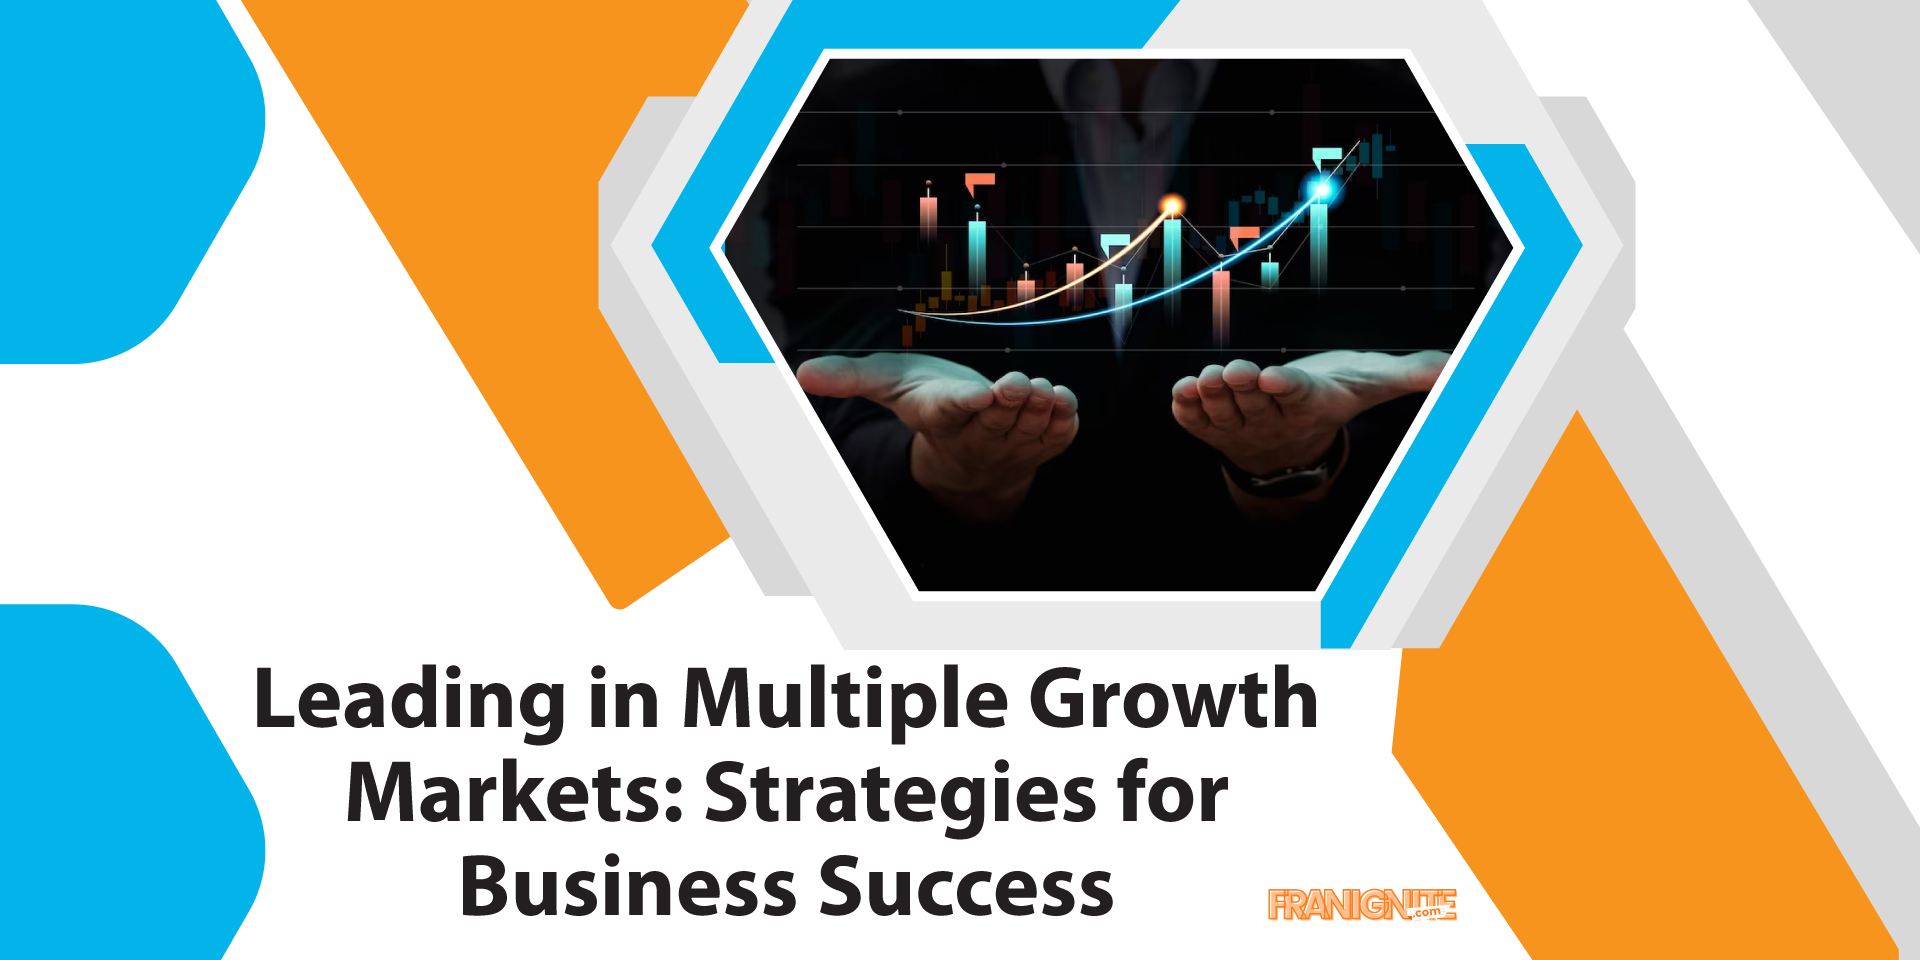 Leading in Multiple Growth Markets: Strategies for Business Success